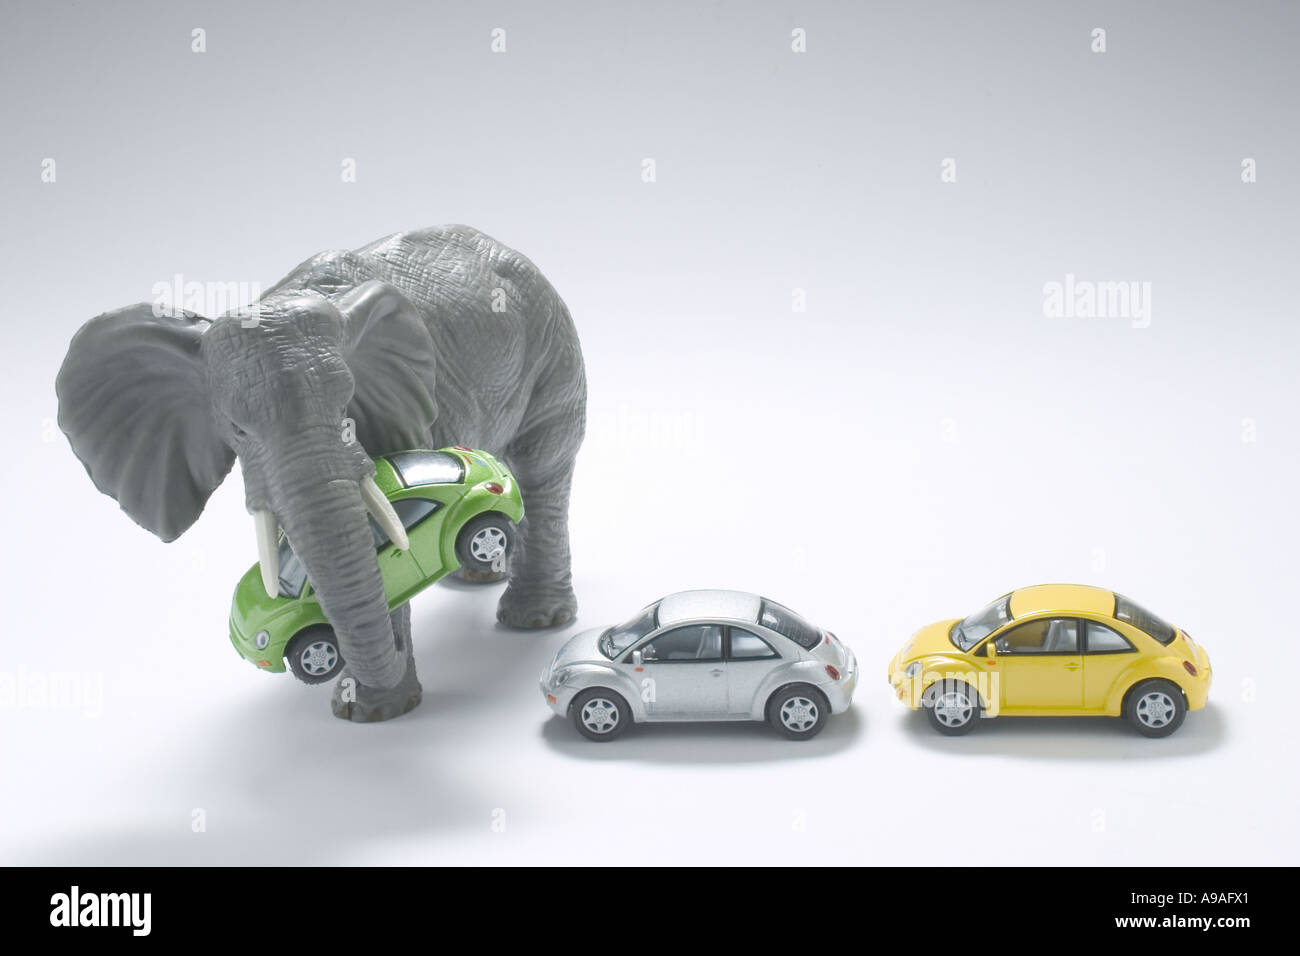 Miniature Elephant with Toy Cars Stock Photo